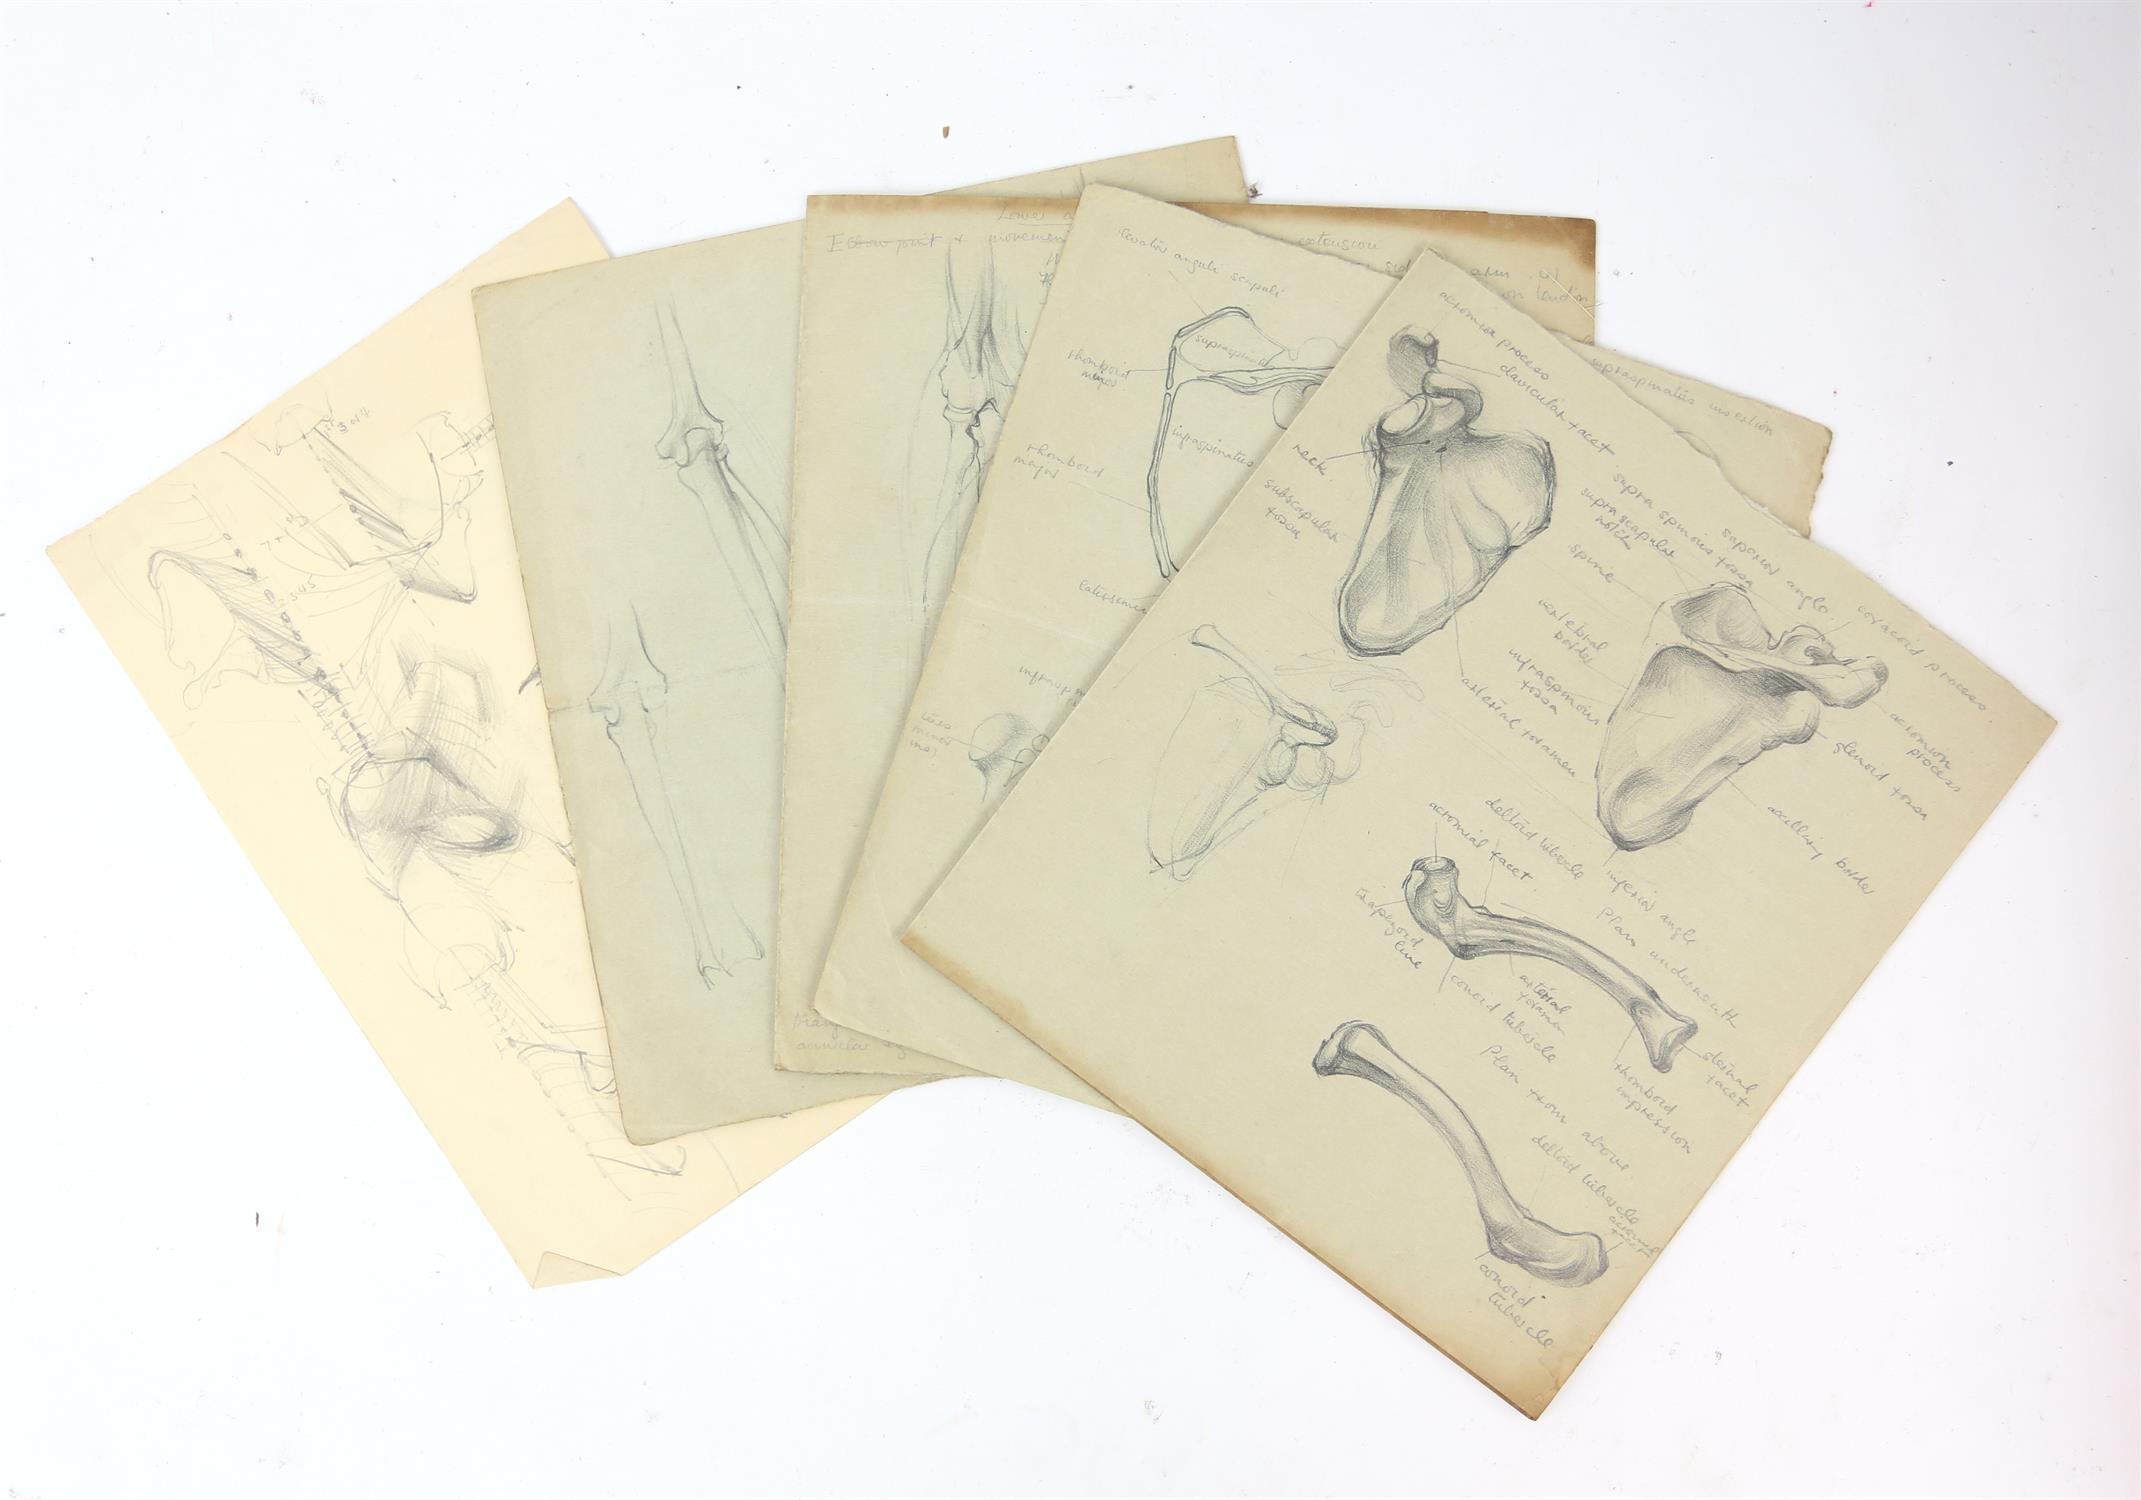 Attributed to Barbara Shaw (b.1924). Folder containing a large number of anatomical drawings with